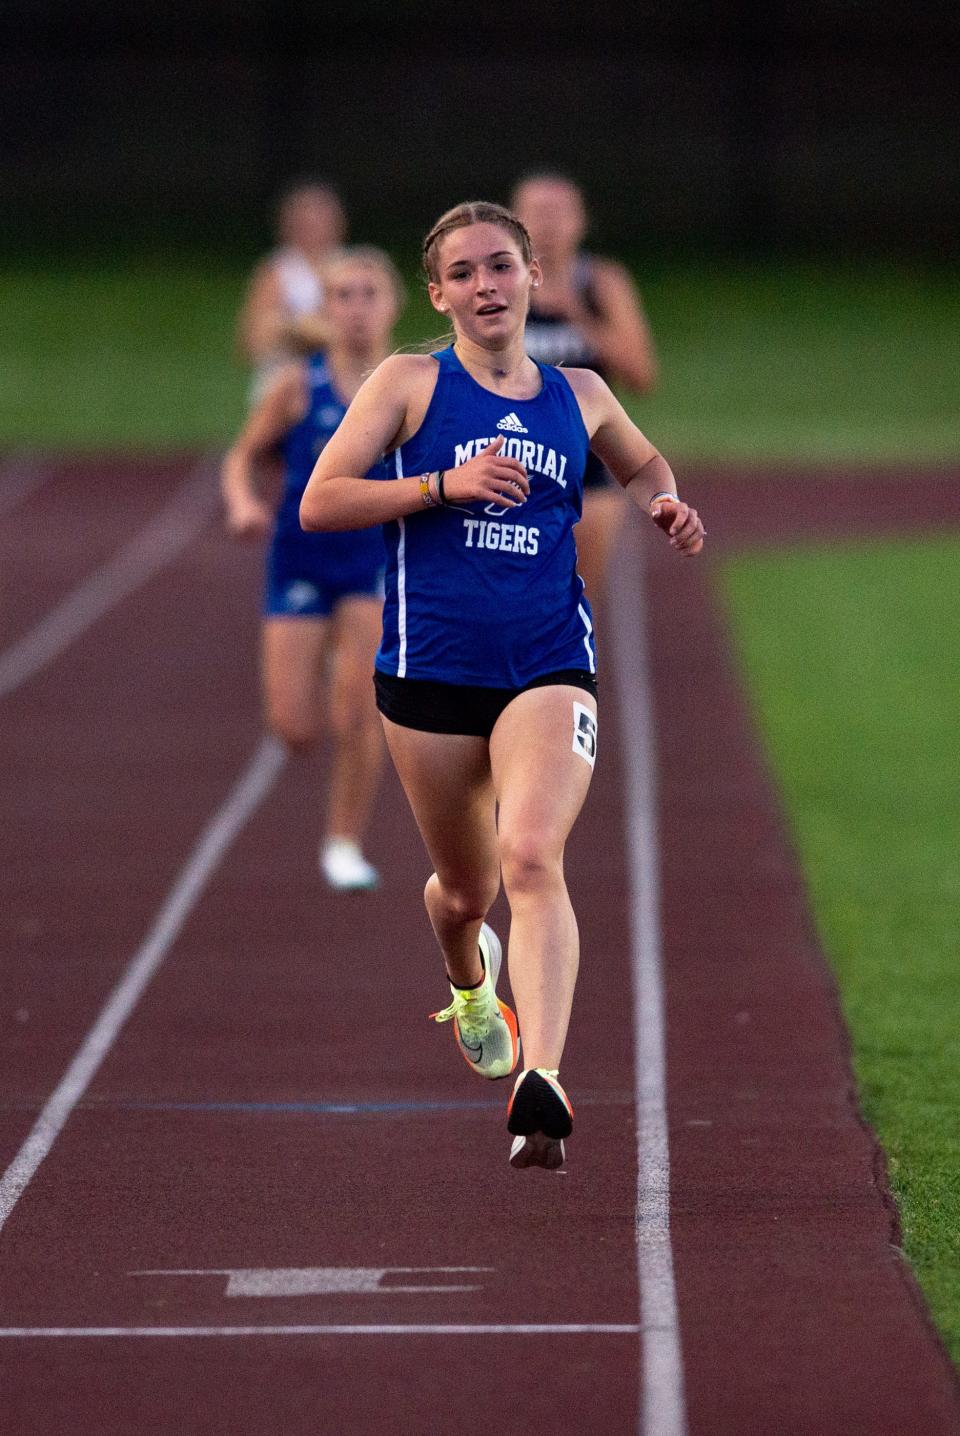 Memorial’s Carson Parks finishes in first place for the 3200 meter run during the 2023 Southern Indiana Athletic Conference Girls Track & Field meet at Central High School in Evansville, Ind., Wednesday, May 3, 2023.